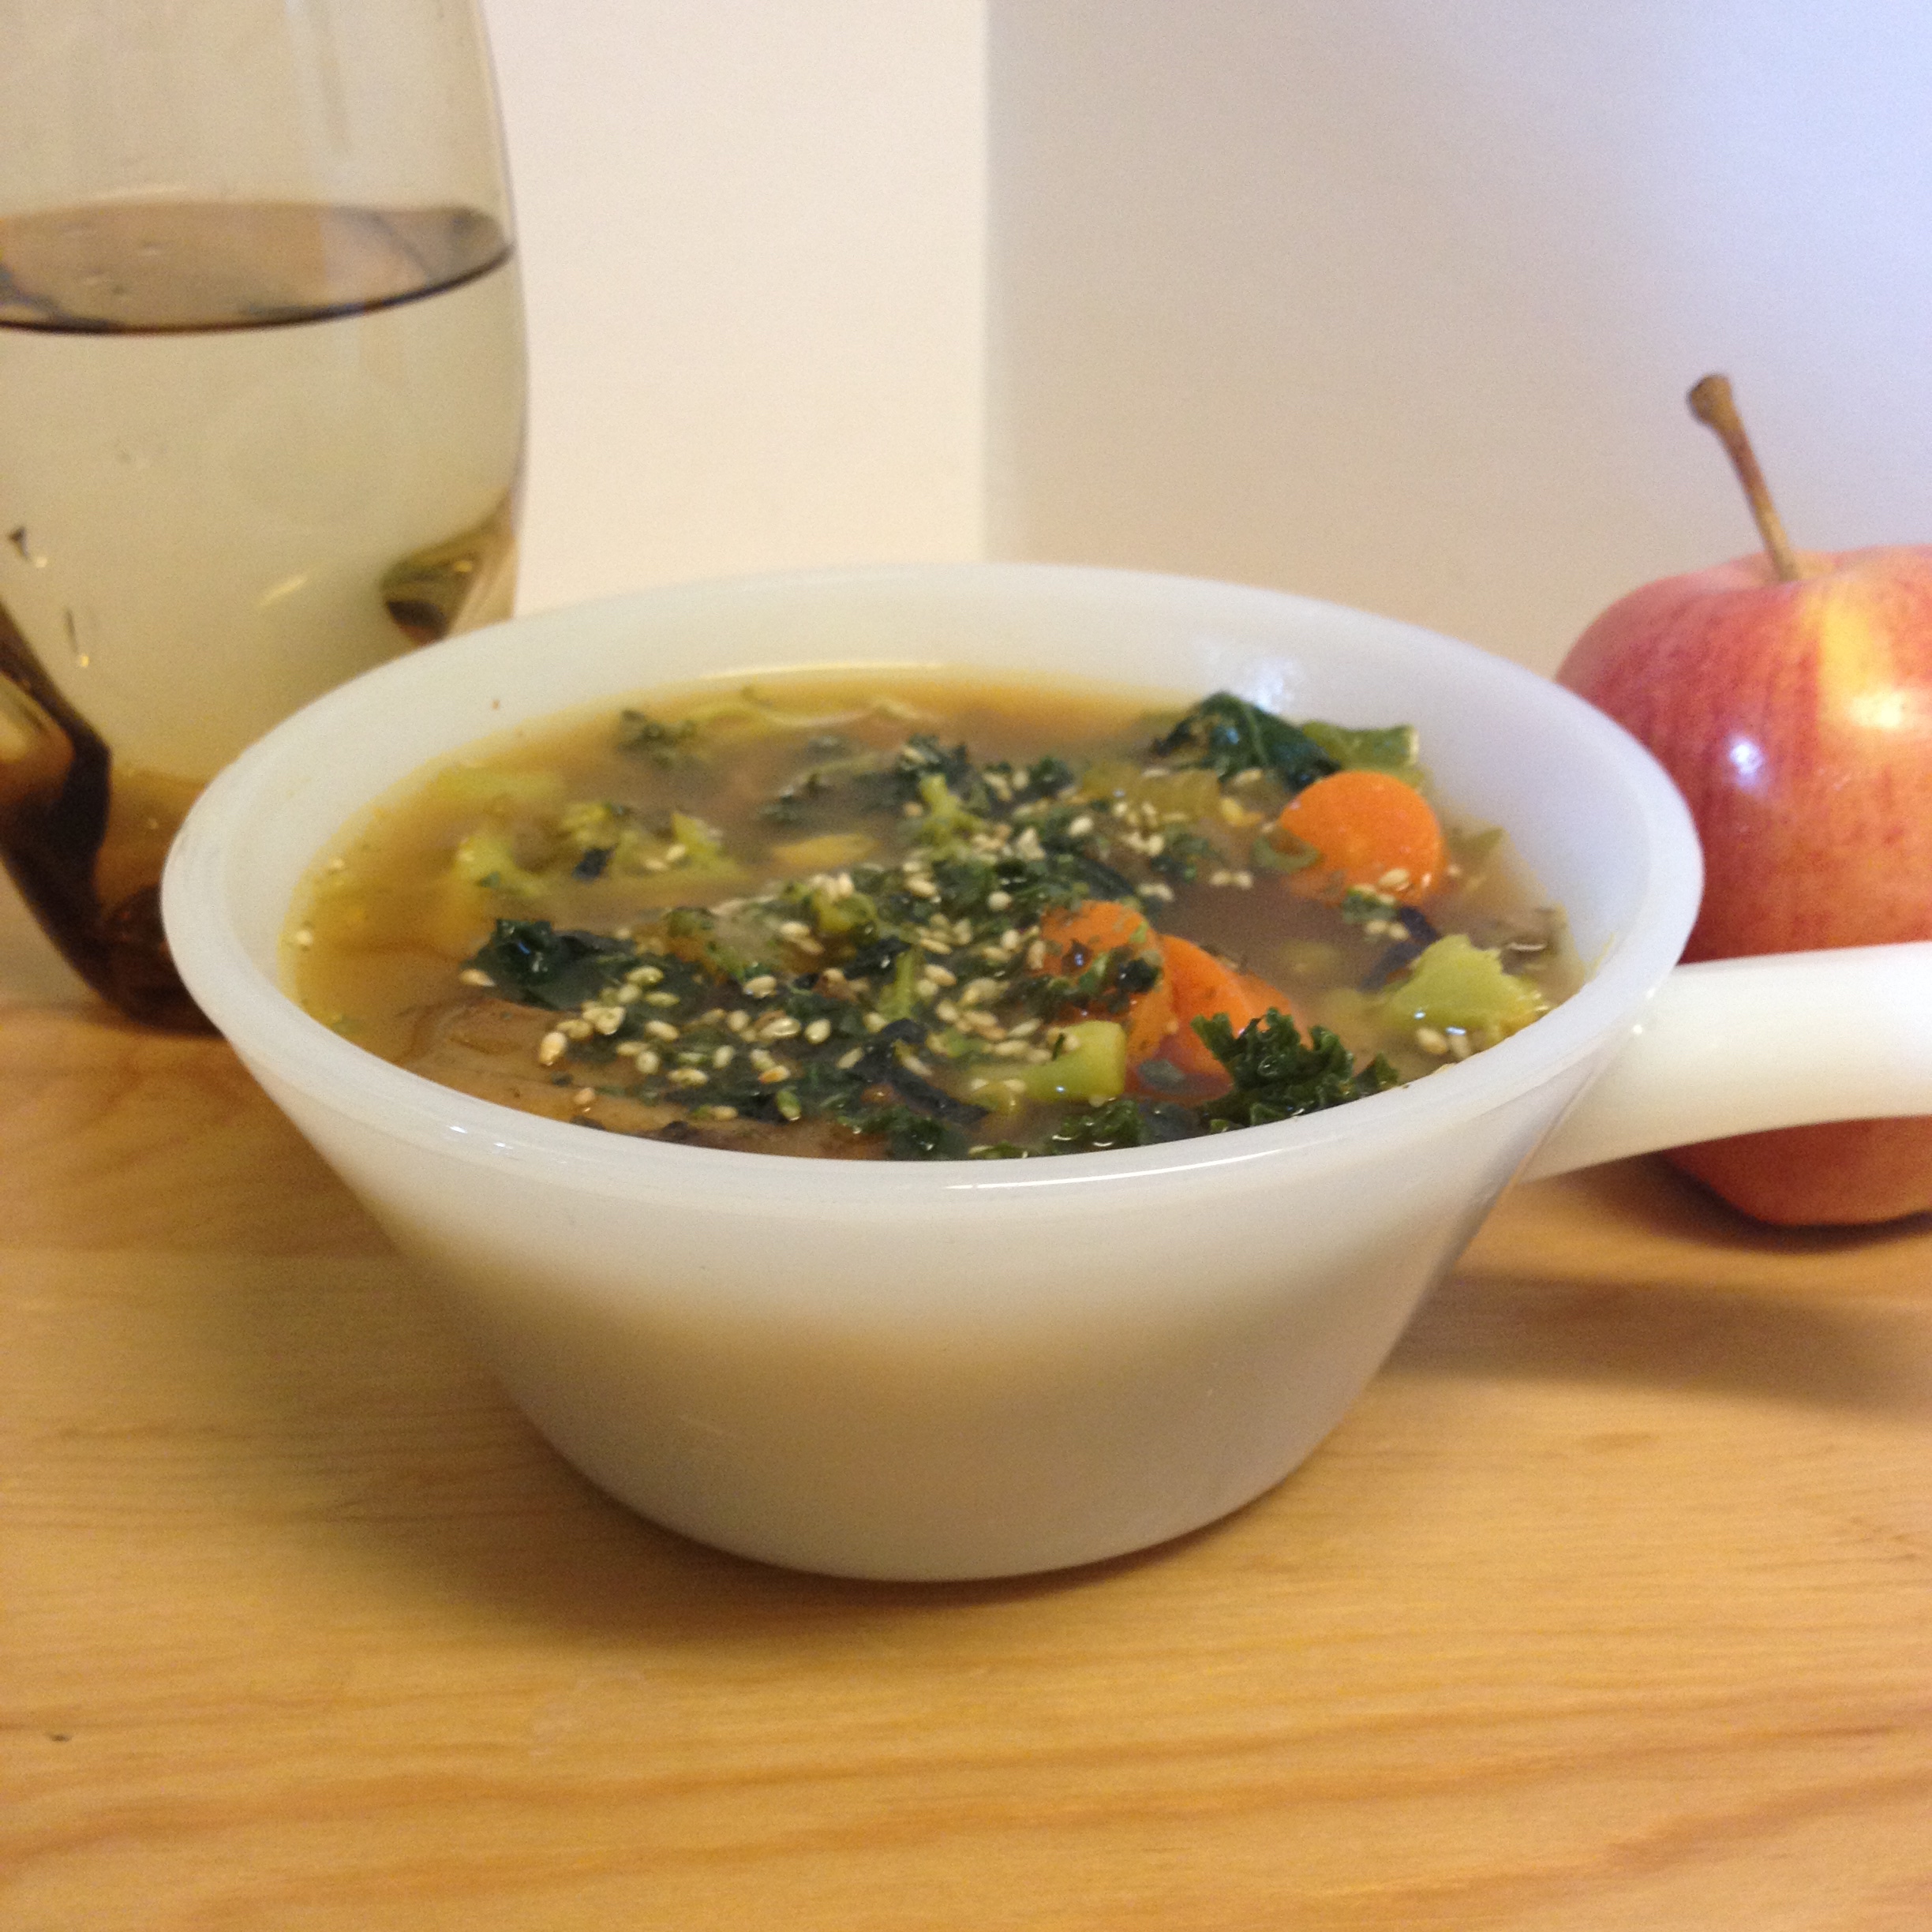 Review #3 of the Oh She Glows 30 Day Challenge – Chickpeas, Pad Thai and Detox Soup